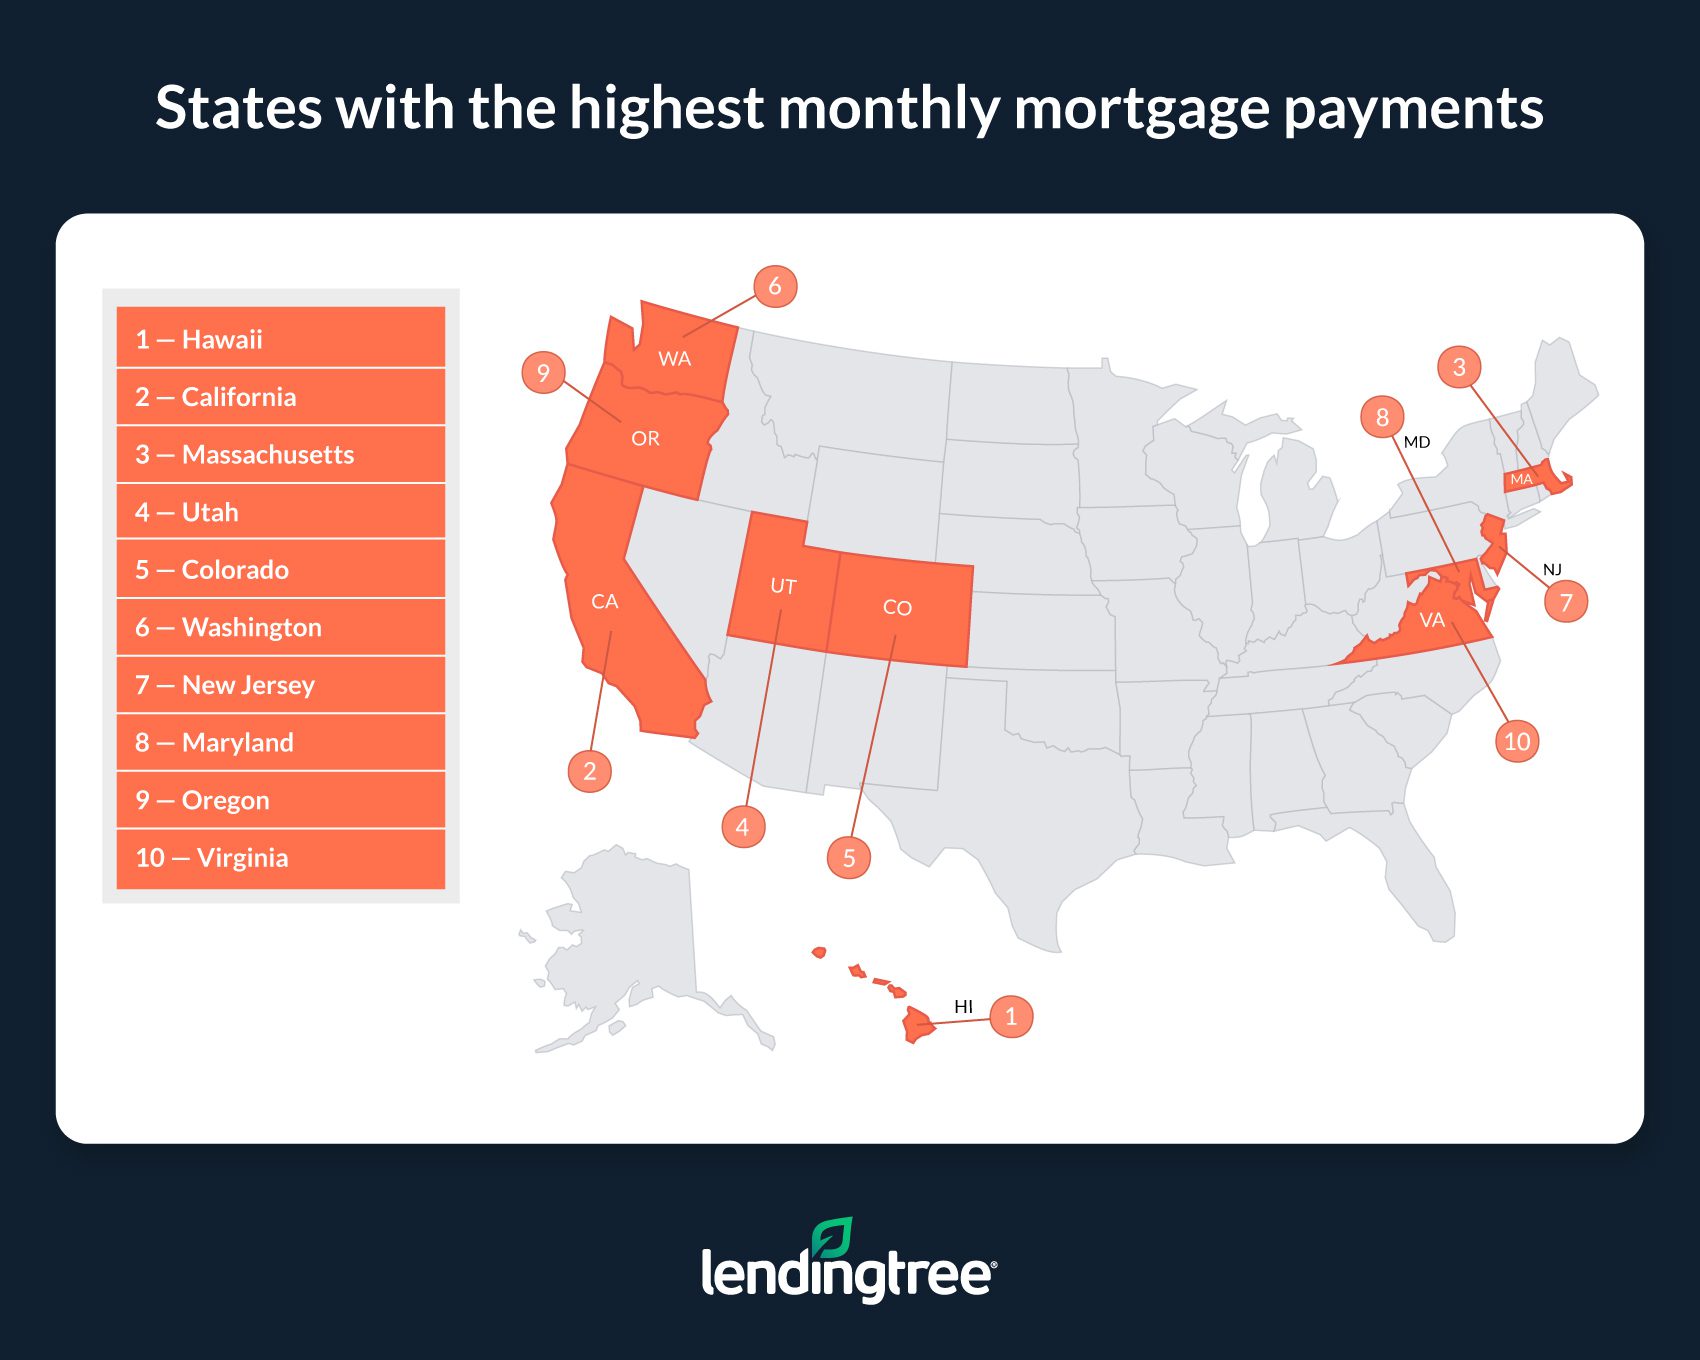 Average Monthly Payment on New Mortgages Reaches 2,317